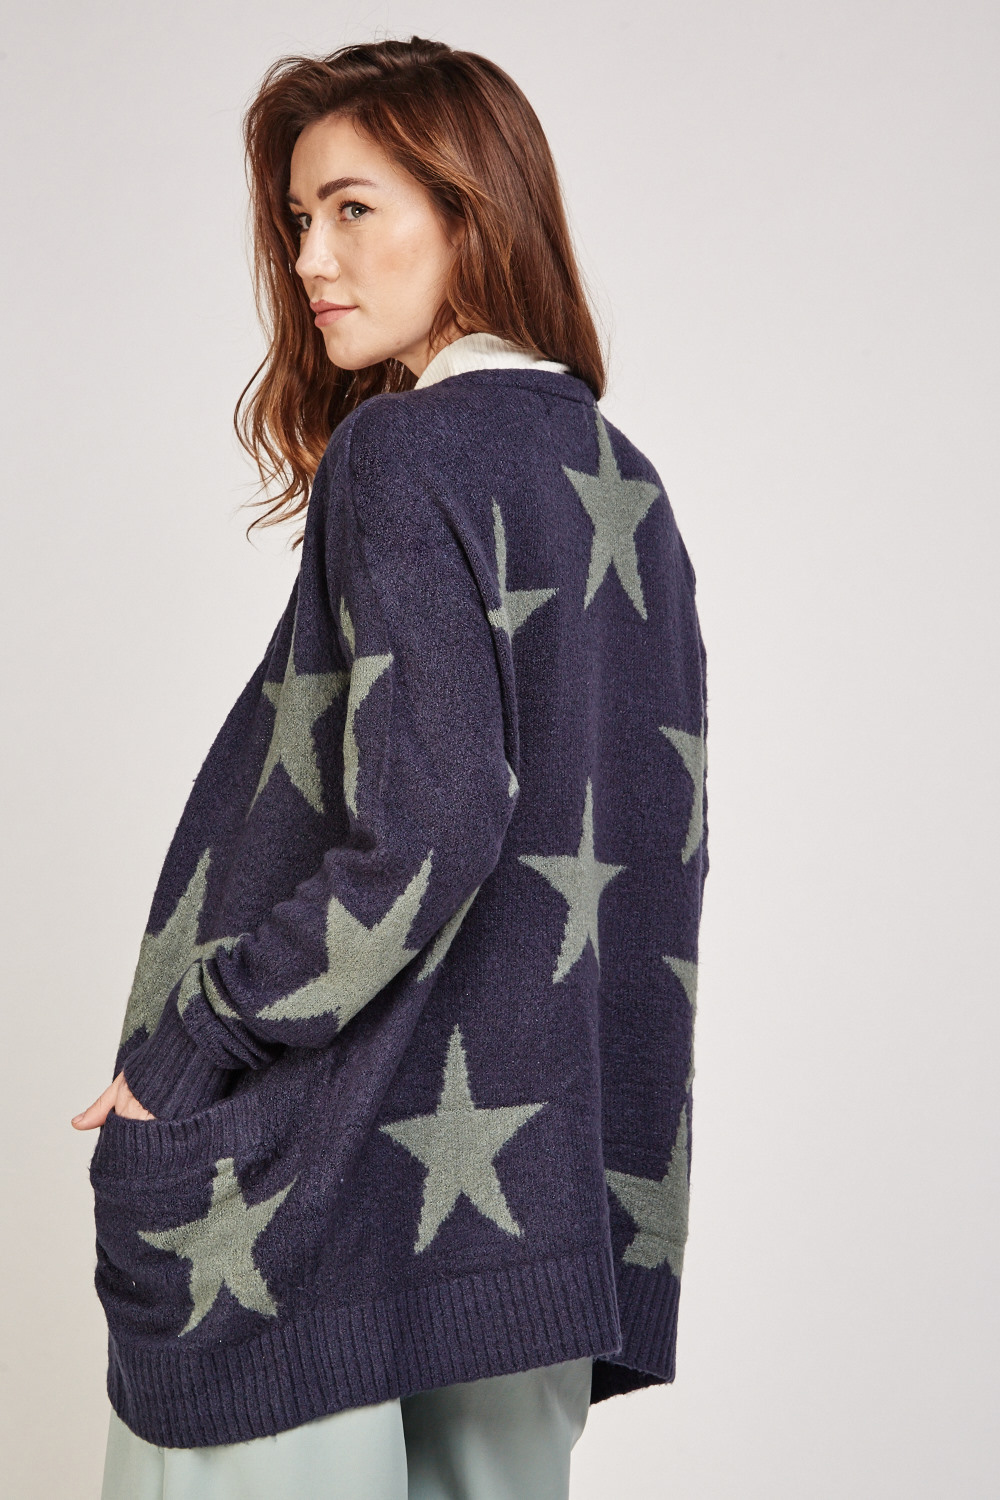 Star Knitted Open Front Cardigan - Just $7